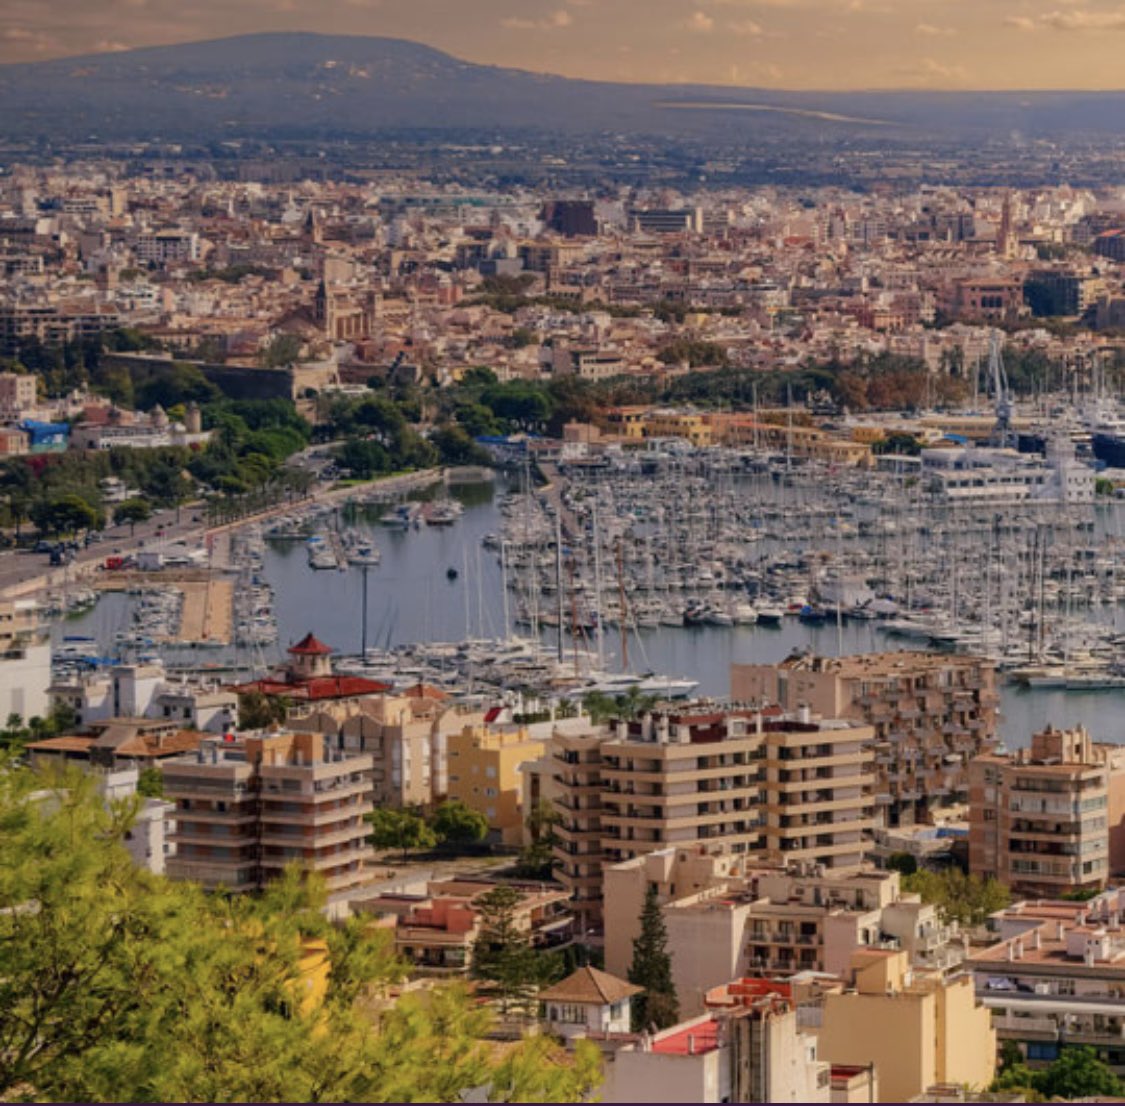 📣We are thrilled to invite you to the 23rd @ENSAT_news Scientific Meeting and 3rd COST Harmonis@tion meeting, which will be held at the beautiful island of Palma de Mallorca (Spain) in October 2-4, 2024. Please find the info and registration link here: 👇 goharmonisation.com/the-joint-23rd…